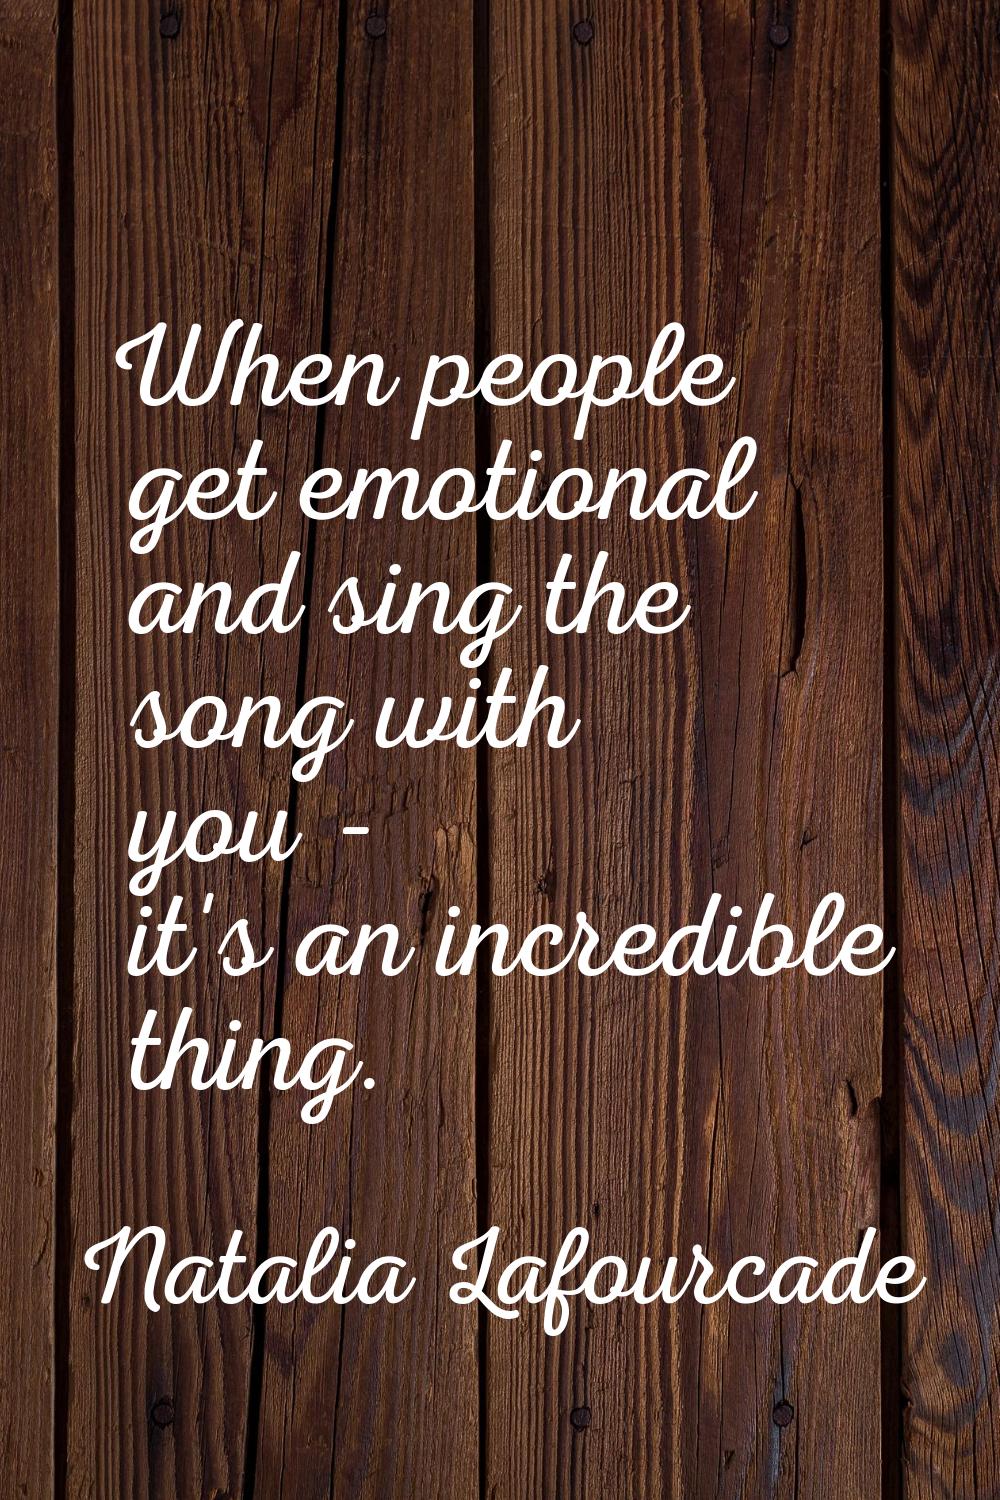 When people get emotional and sing the song with you - it's an incredible thing.